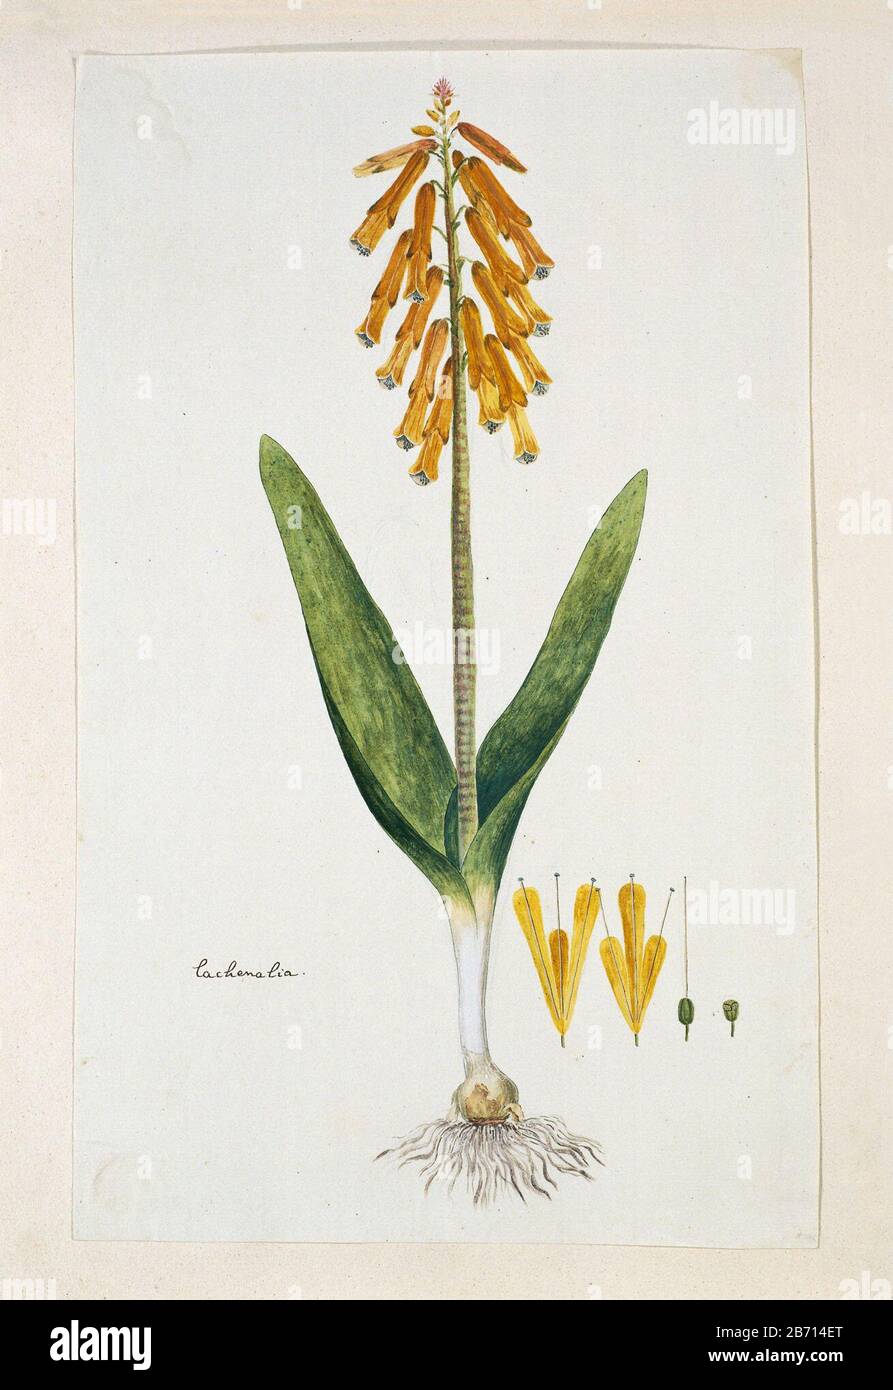 Lachenalia aloides (Lf) Engl var aurea lachenalia (titel op object) Lachenalia aloides (L. F.) Engl. var. aurealachenalia (title object) Property Type: Drawing album leaf Item number: RP-T-1914-18-39 Inscriptions / Brands: annotation, left, pen and brown '. Lachenalia (Gordon's handwriting) Description: Lachenalia aloides (L. F.) Engl. var. aurea manufacture manufacturer: artist: Robert Jacob Gordon Date: Oct 1777 - mar-1786 Physical features: brush in watercolor in colors, pencil and black chalk, brush in body color, pen and ink material: paper finishing paint ink pencil crayons watercolor te Stock Photo